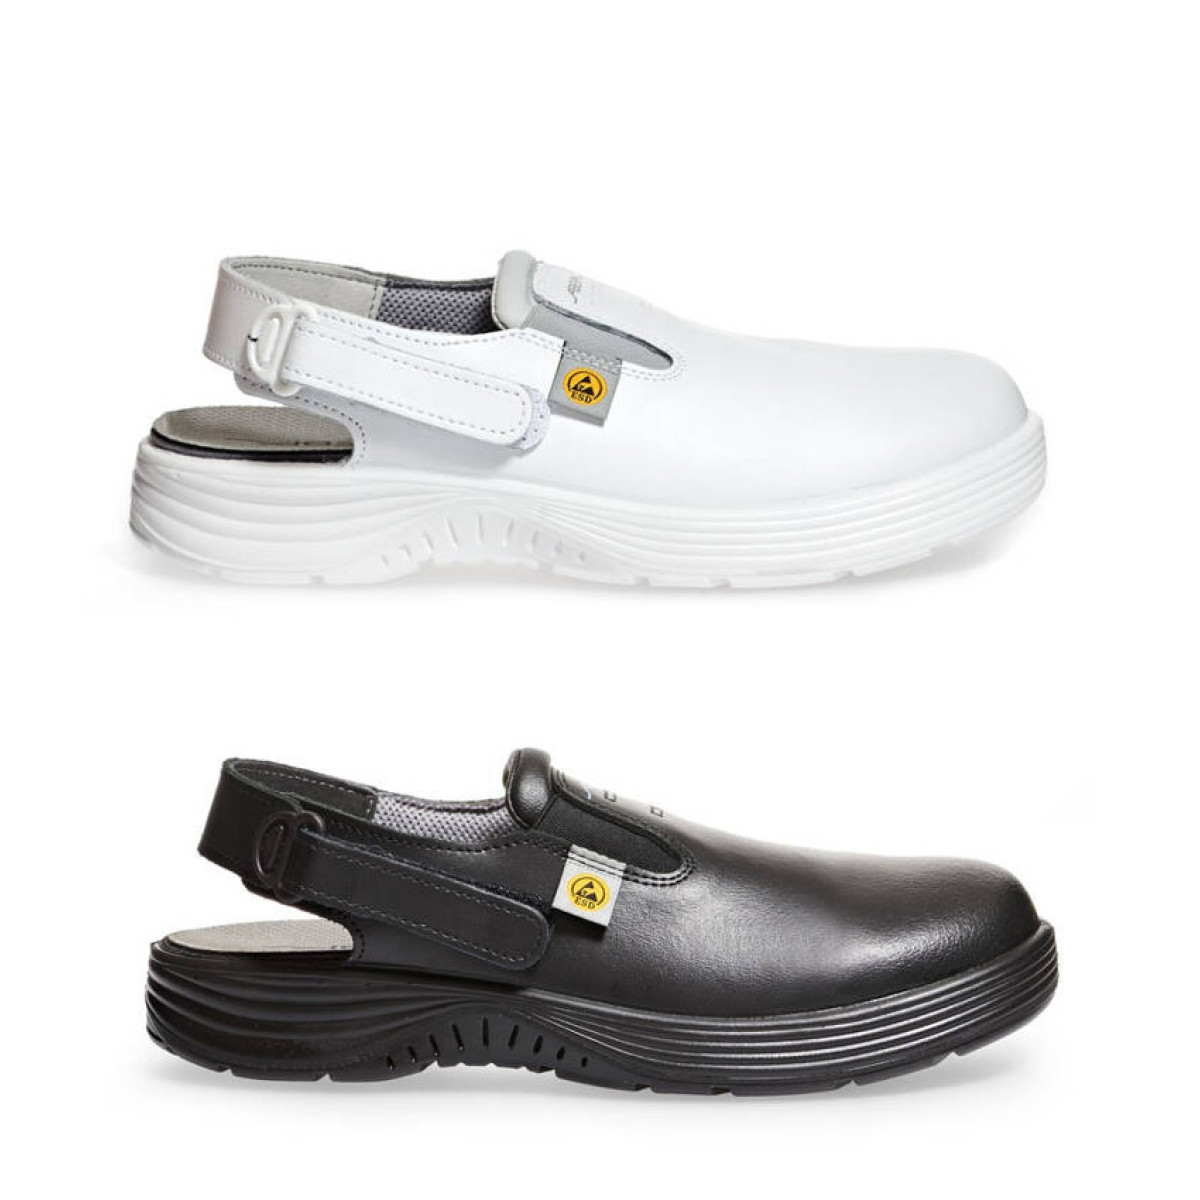 ESD ladies - and men - safety shoe